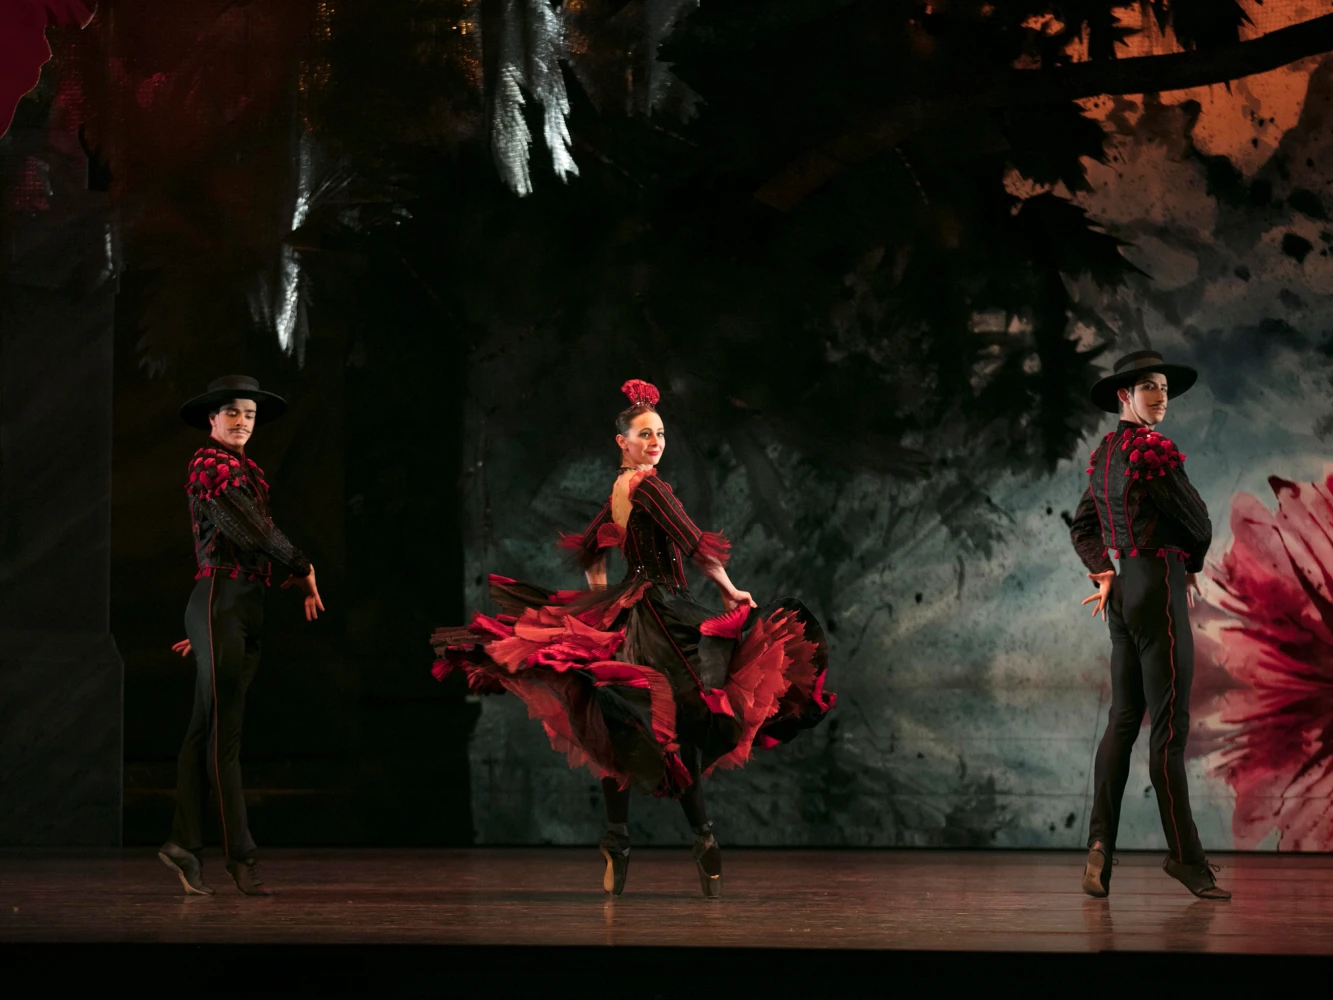 The Australian Ballet presents The Nutcracker: What to expect - 6